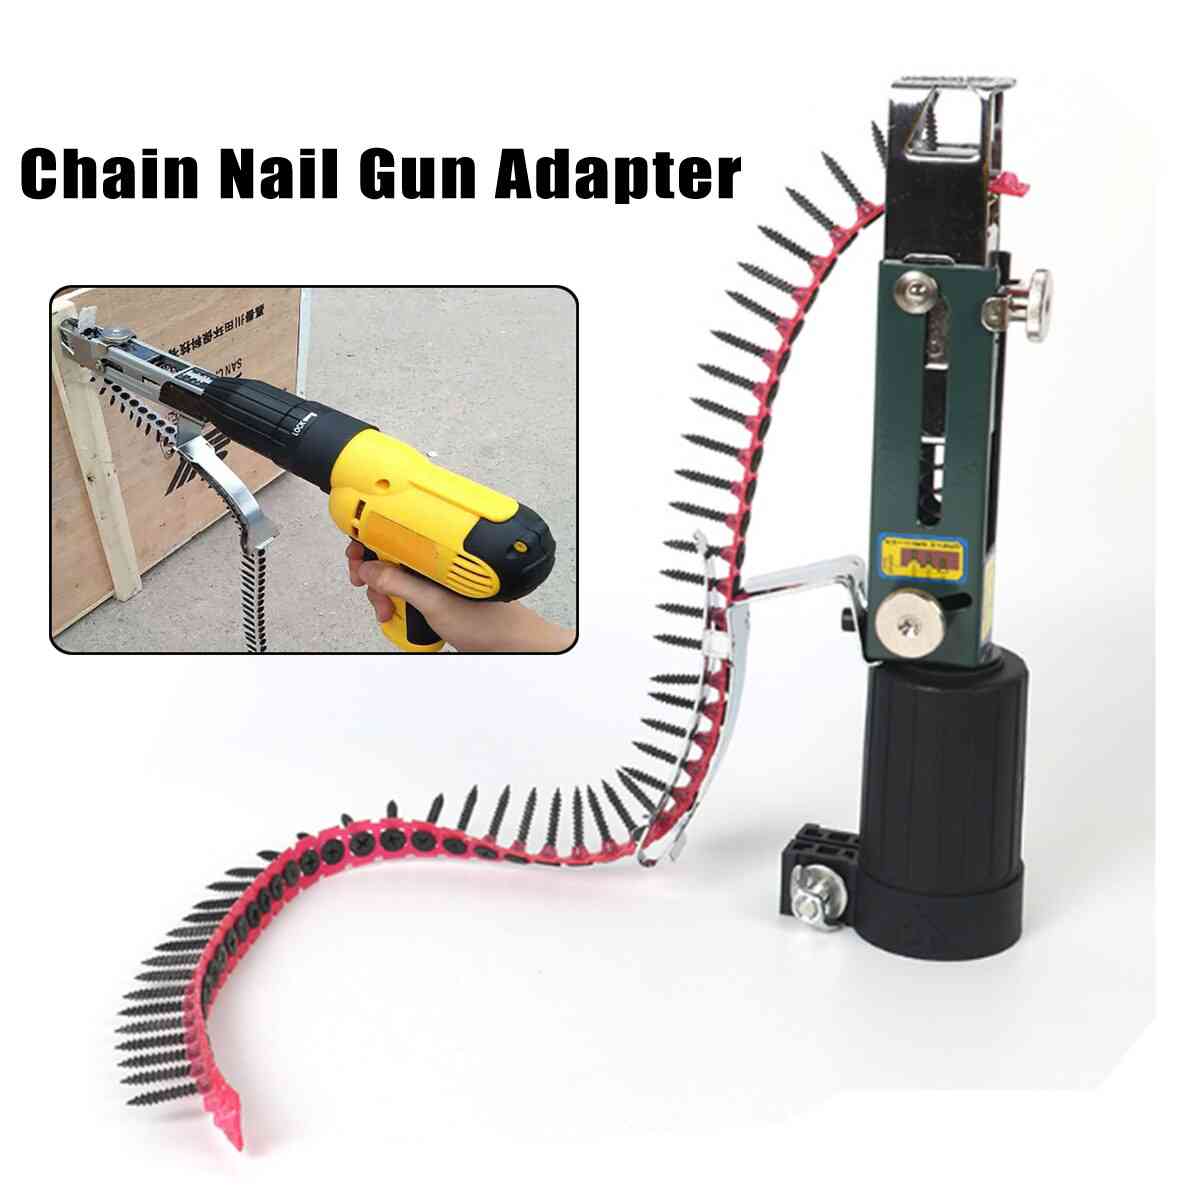 Screw Spike Chain, Nail Gun Adapter For Electric Drill - Woodworking